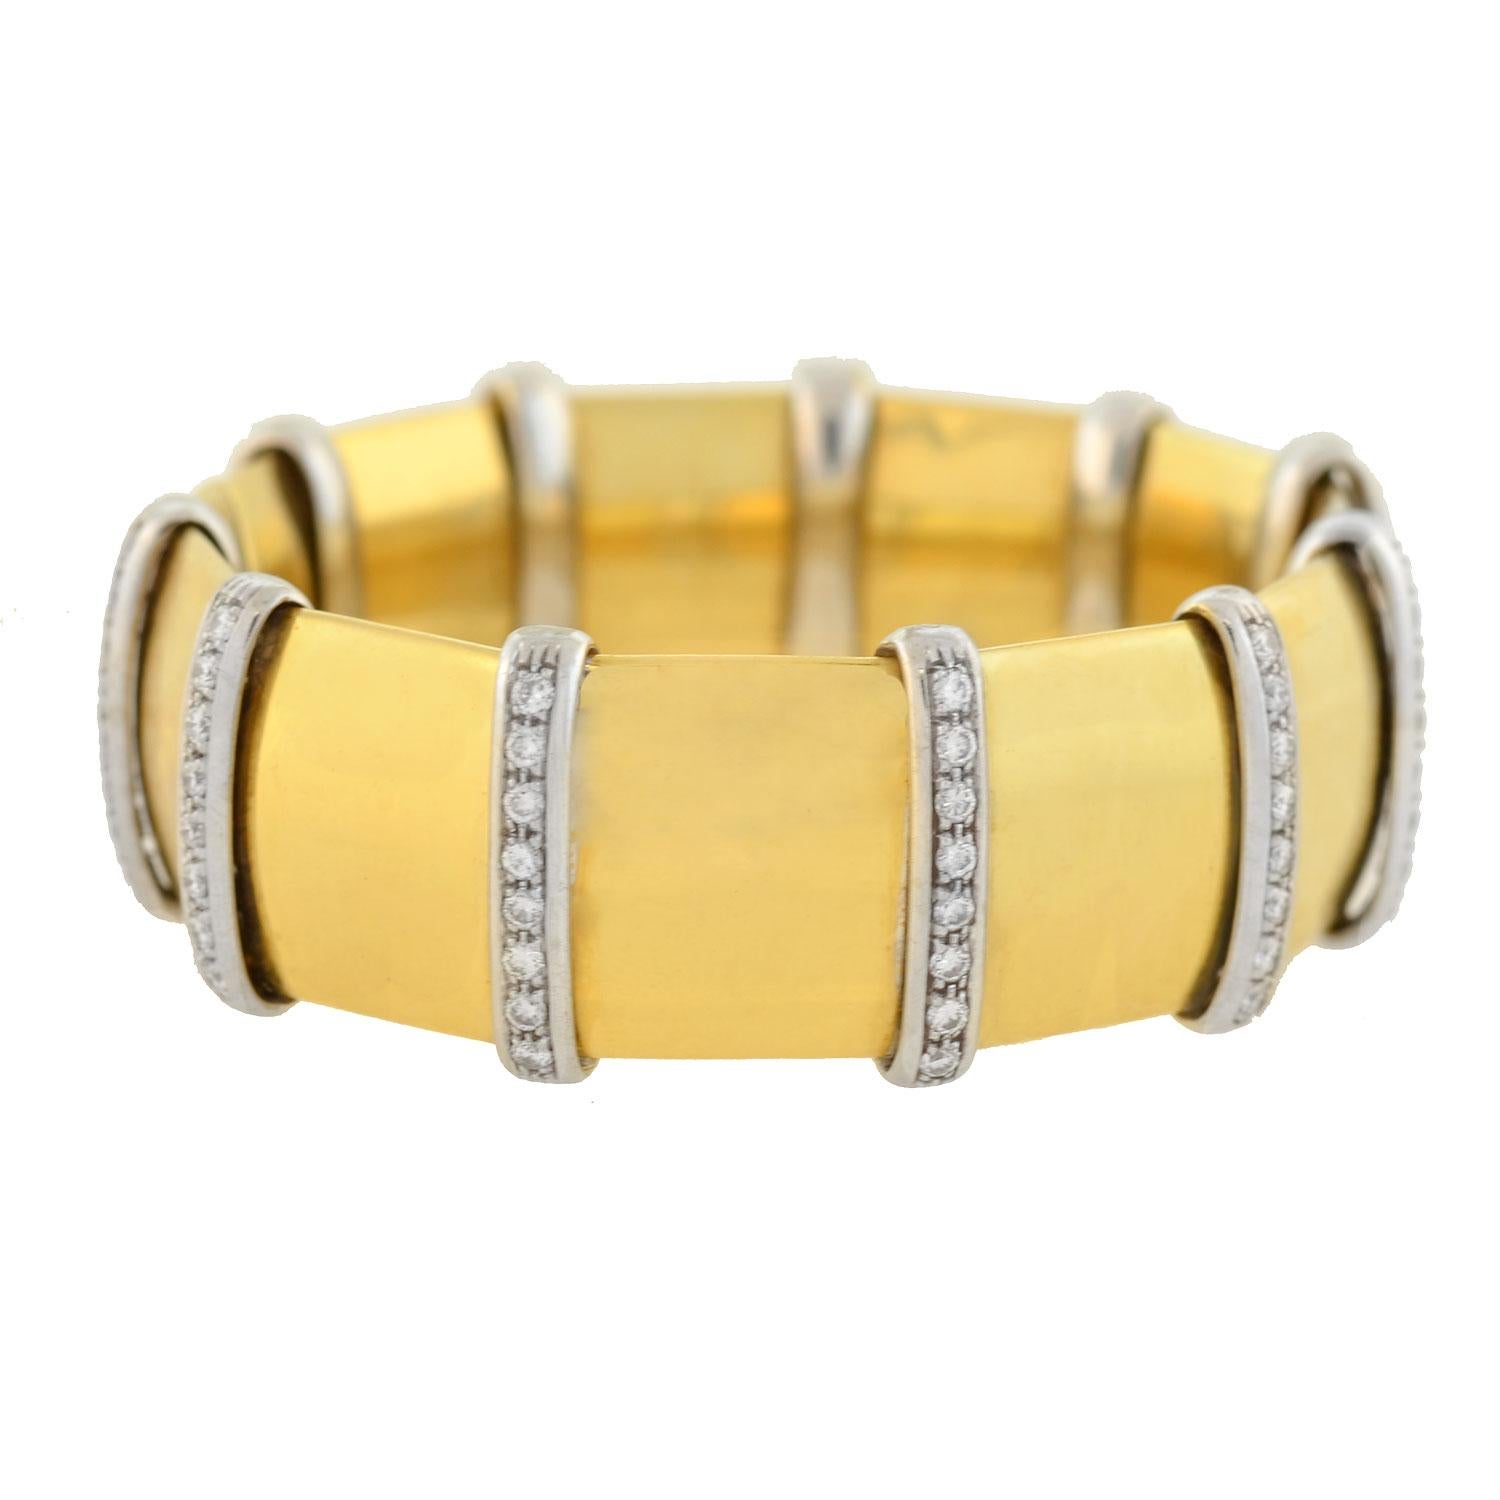 Established in Verona in 1879,​ ​Italian jewelry designer Carlo Weingrill, was a master of 18kt gold jewelry. Each handcrafted piece features top quality craftsmanship that has been handed down today through the generations.

Carlo began working as